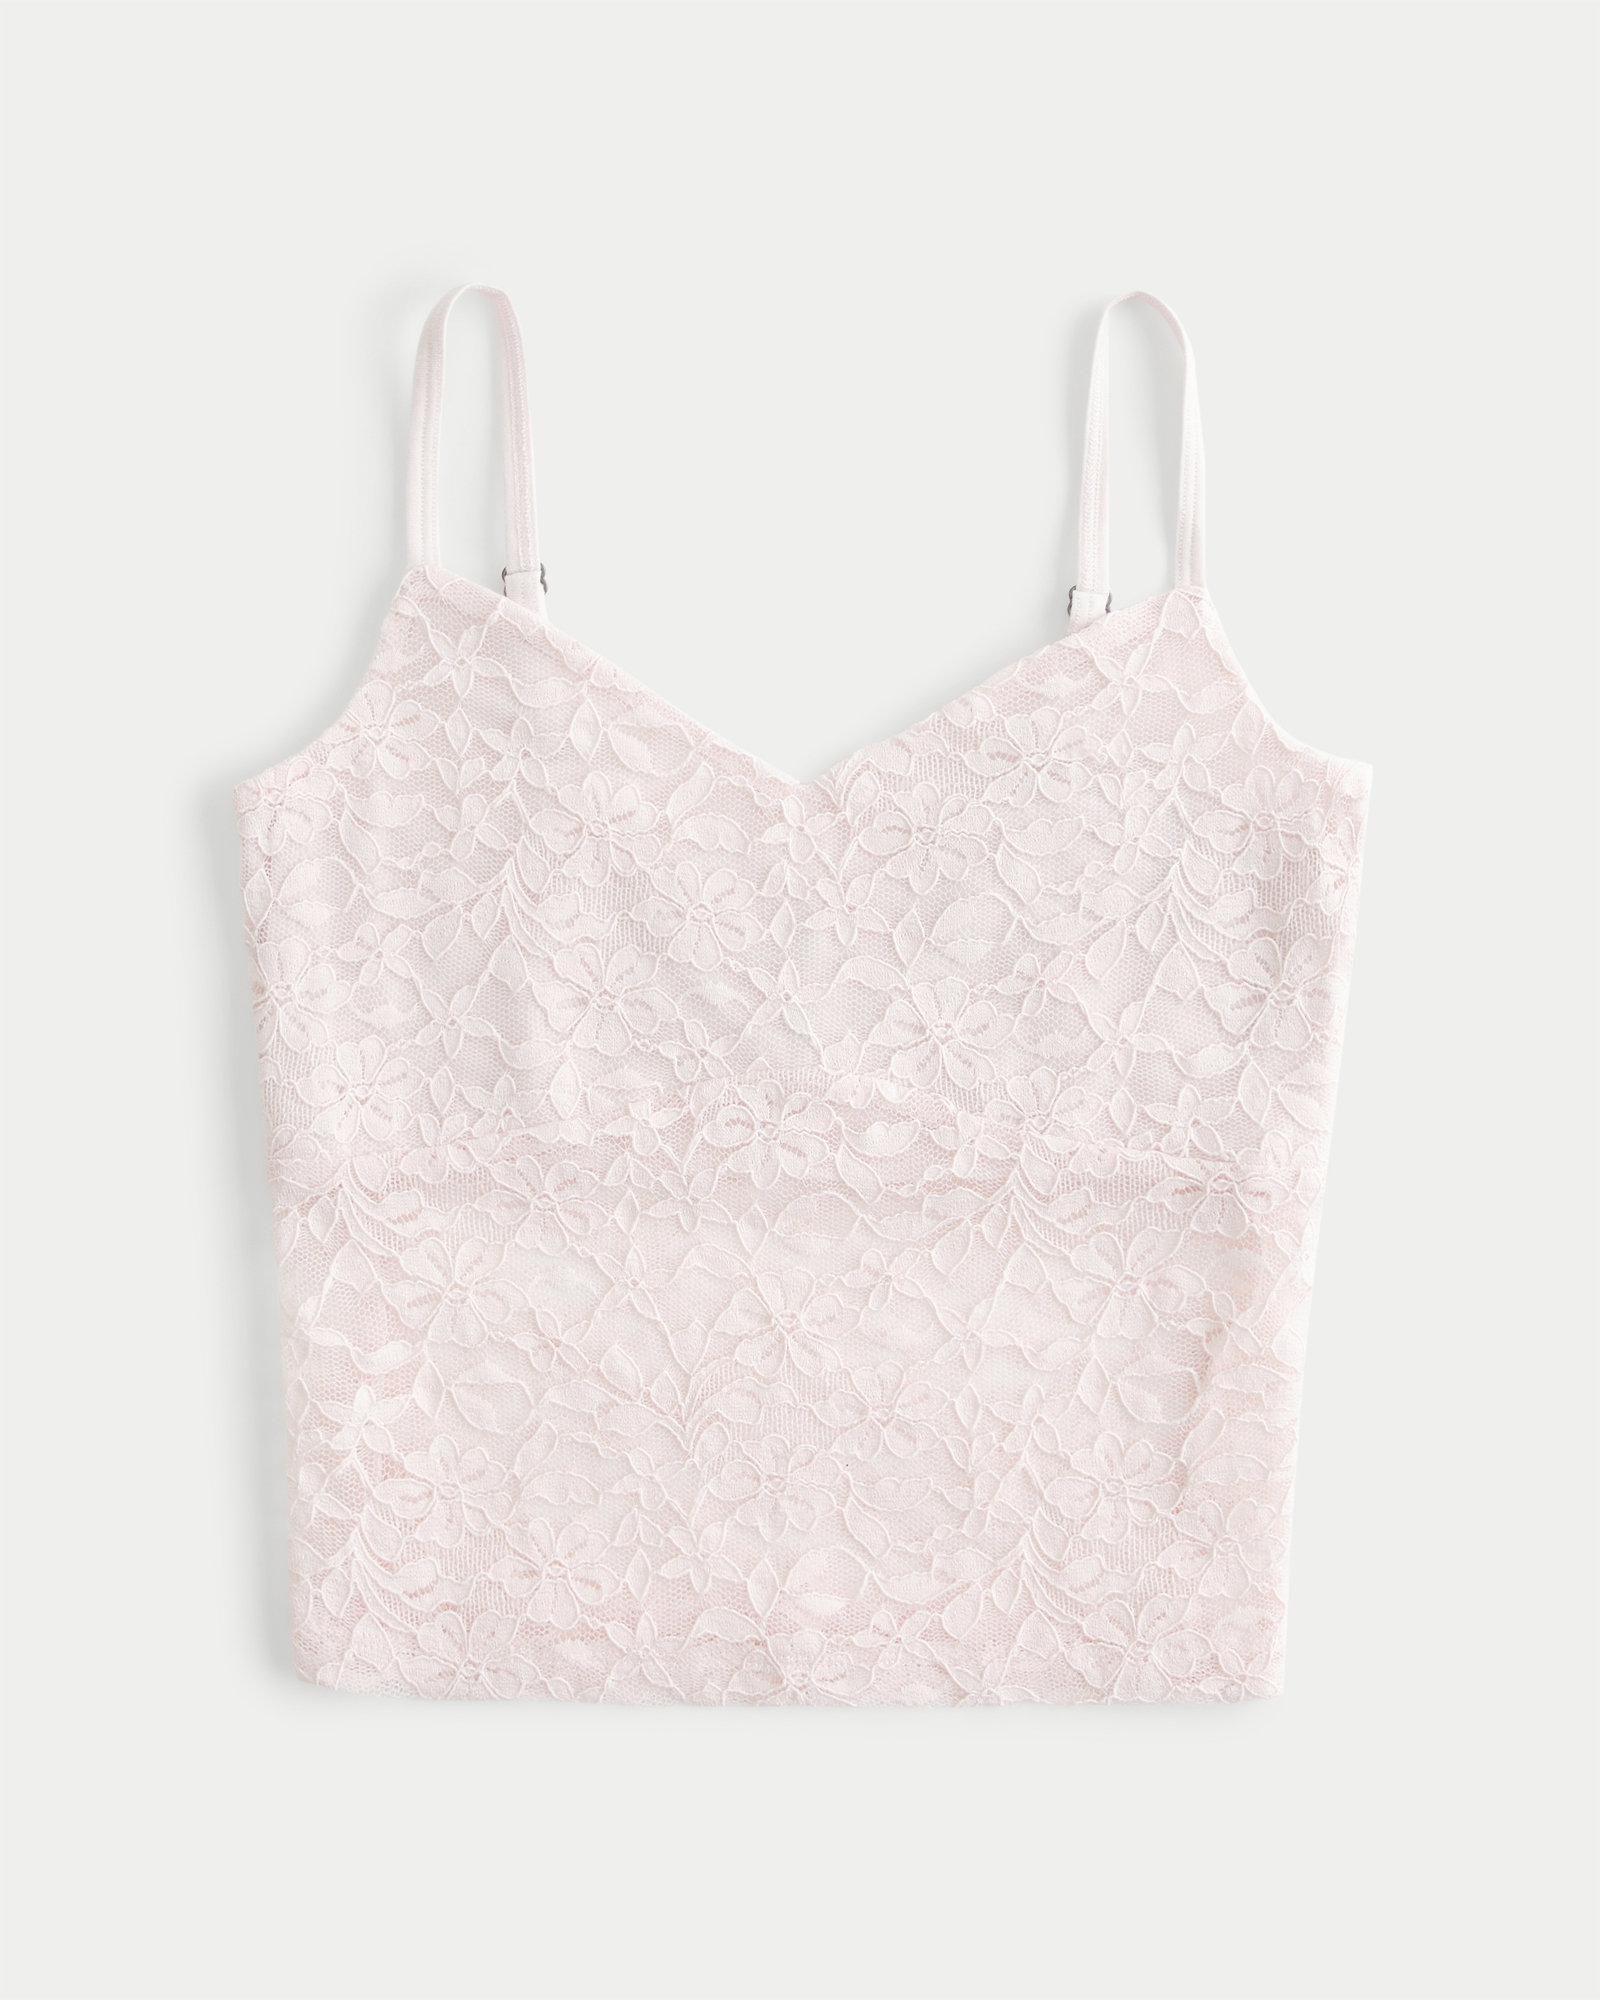 Women's All-Over Lace Cami, Women's Clearance